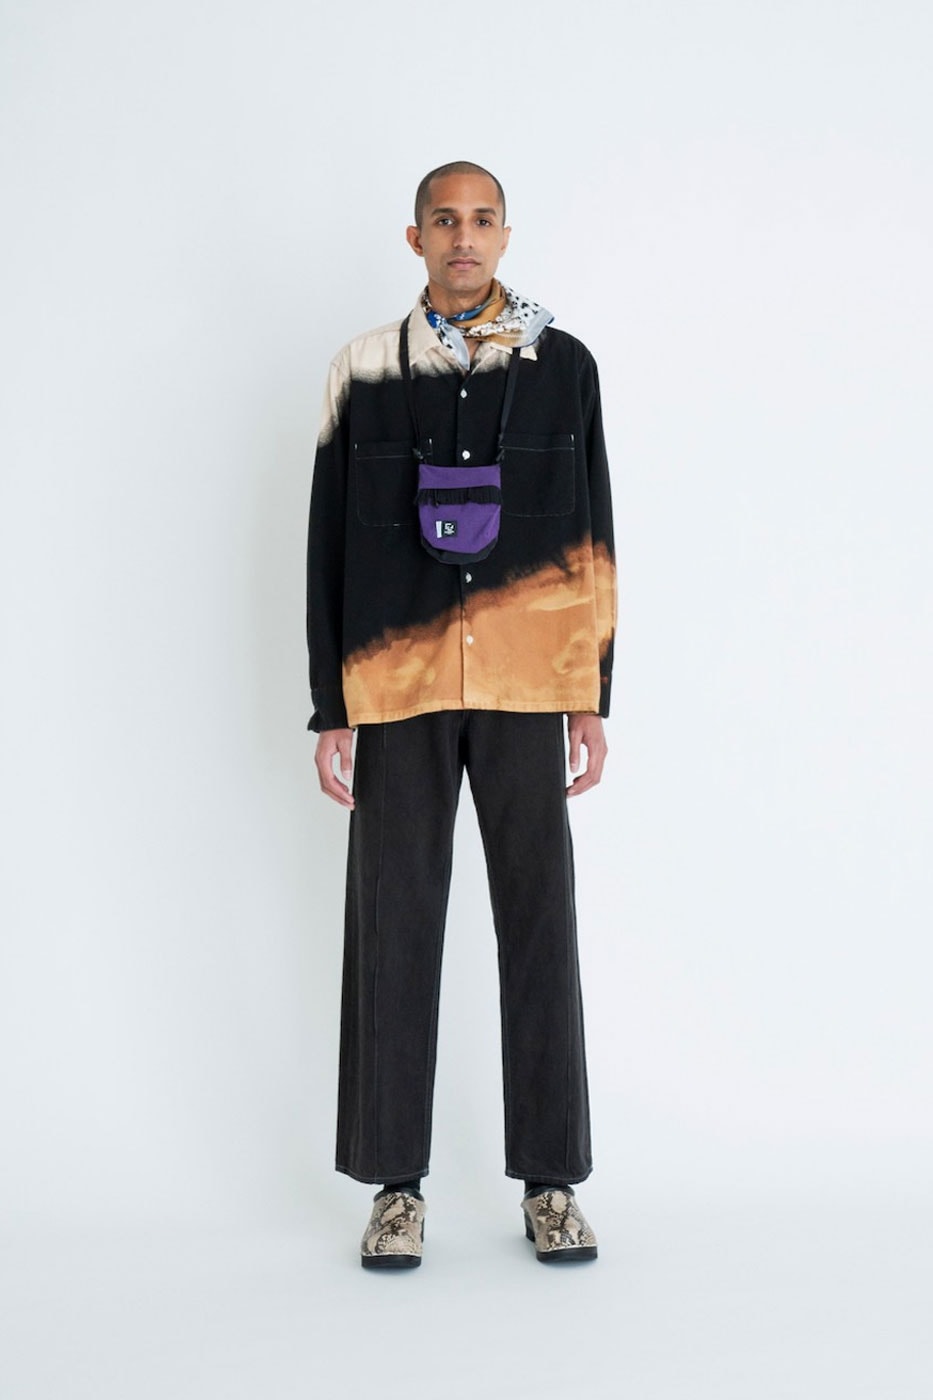 NOMA t.d. FW22 Embodies Surrounding Landscapes With Filled With Nature Inspired Patterns  NOMA t.d. fall winter 2022 lookbook